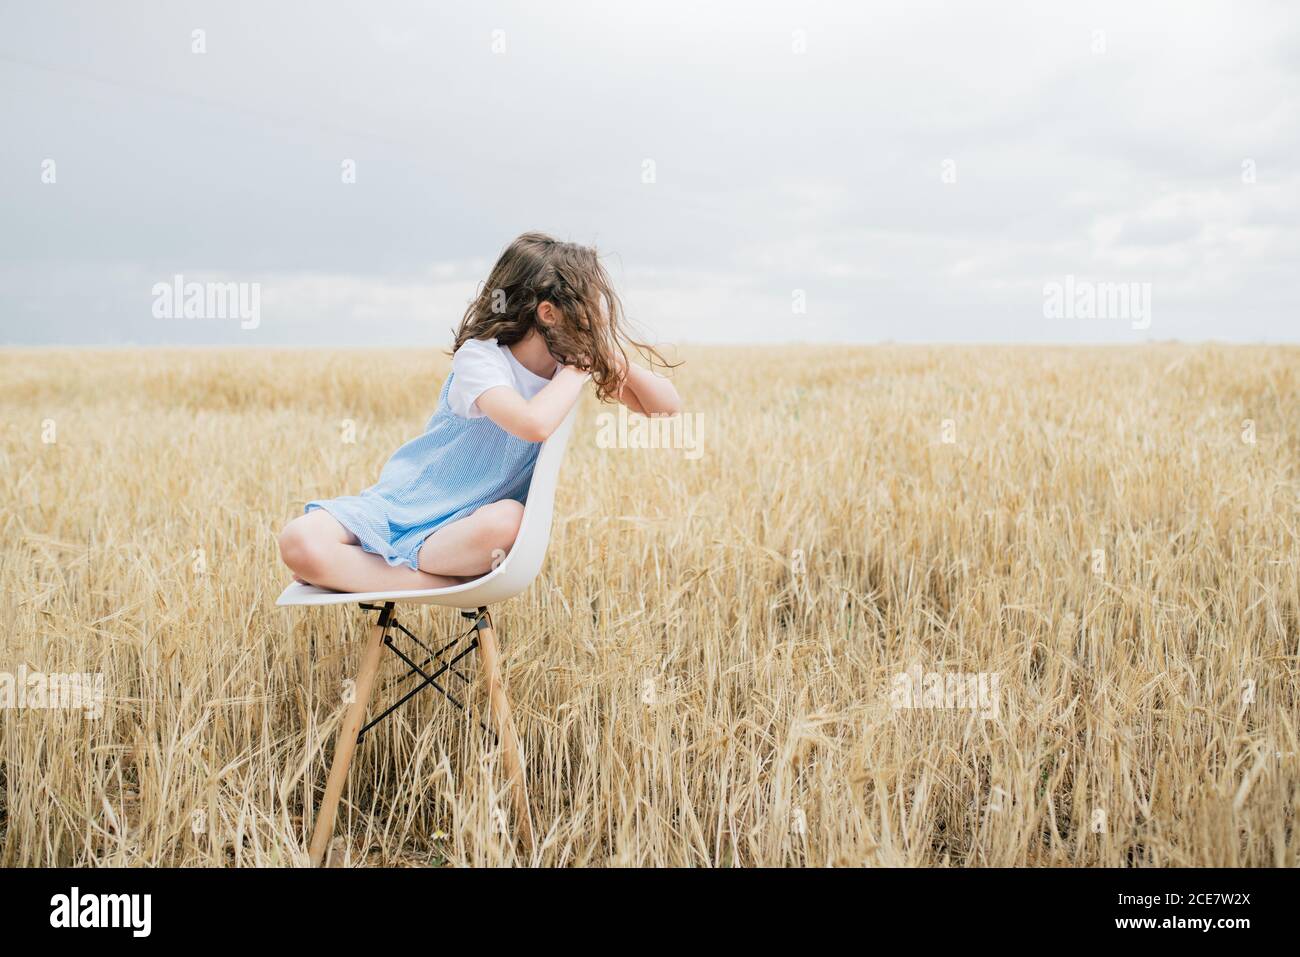 Alone ponder barefoot child with brown hair sitting on chair embracing knees in field with faded grass in overcast weather in autumn and looking away Stock Photo